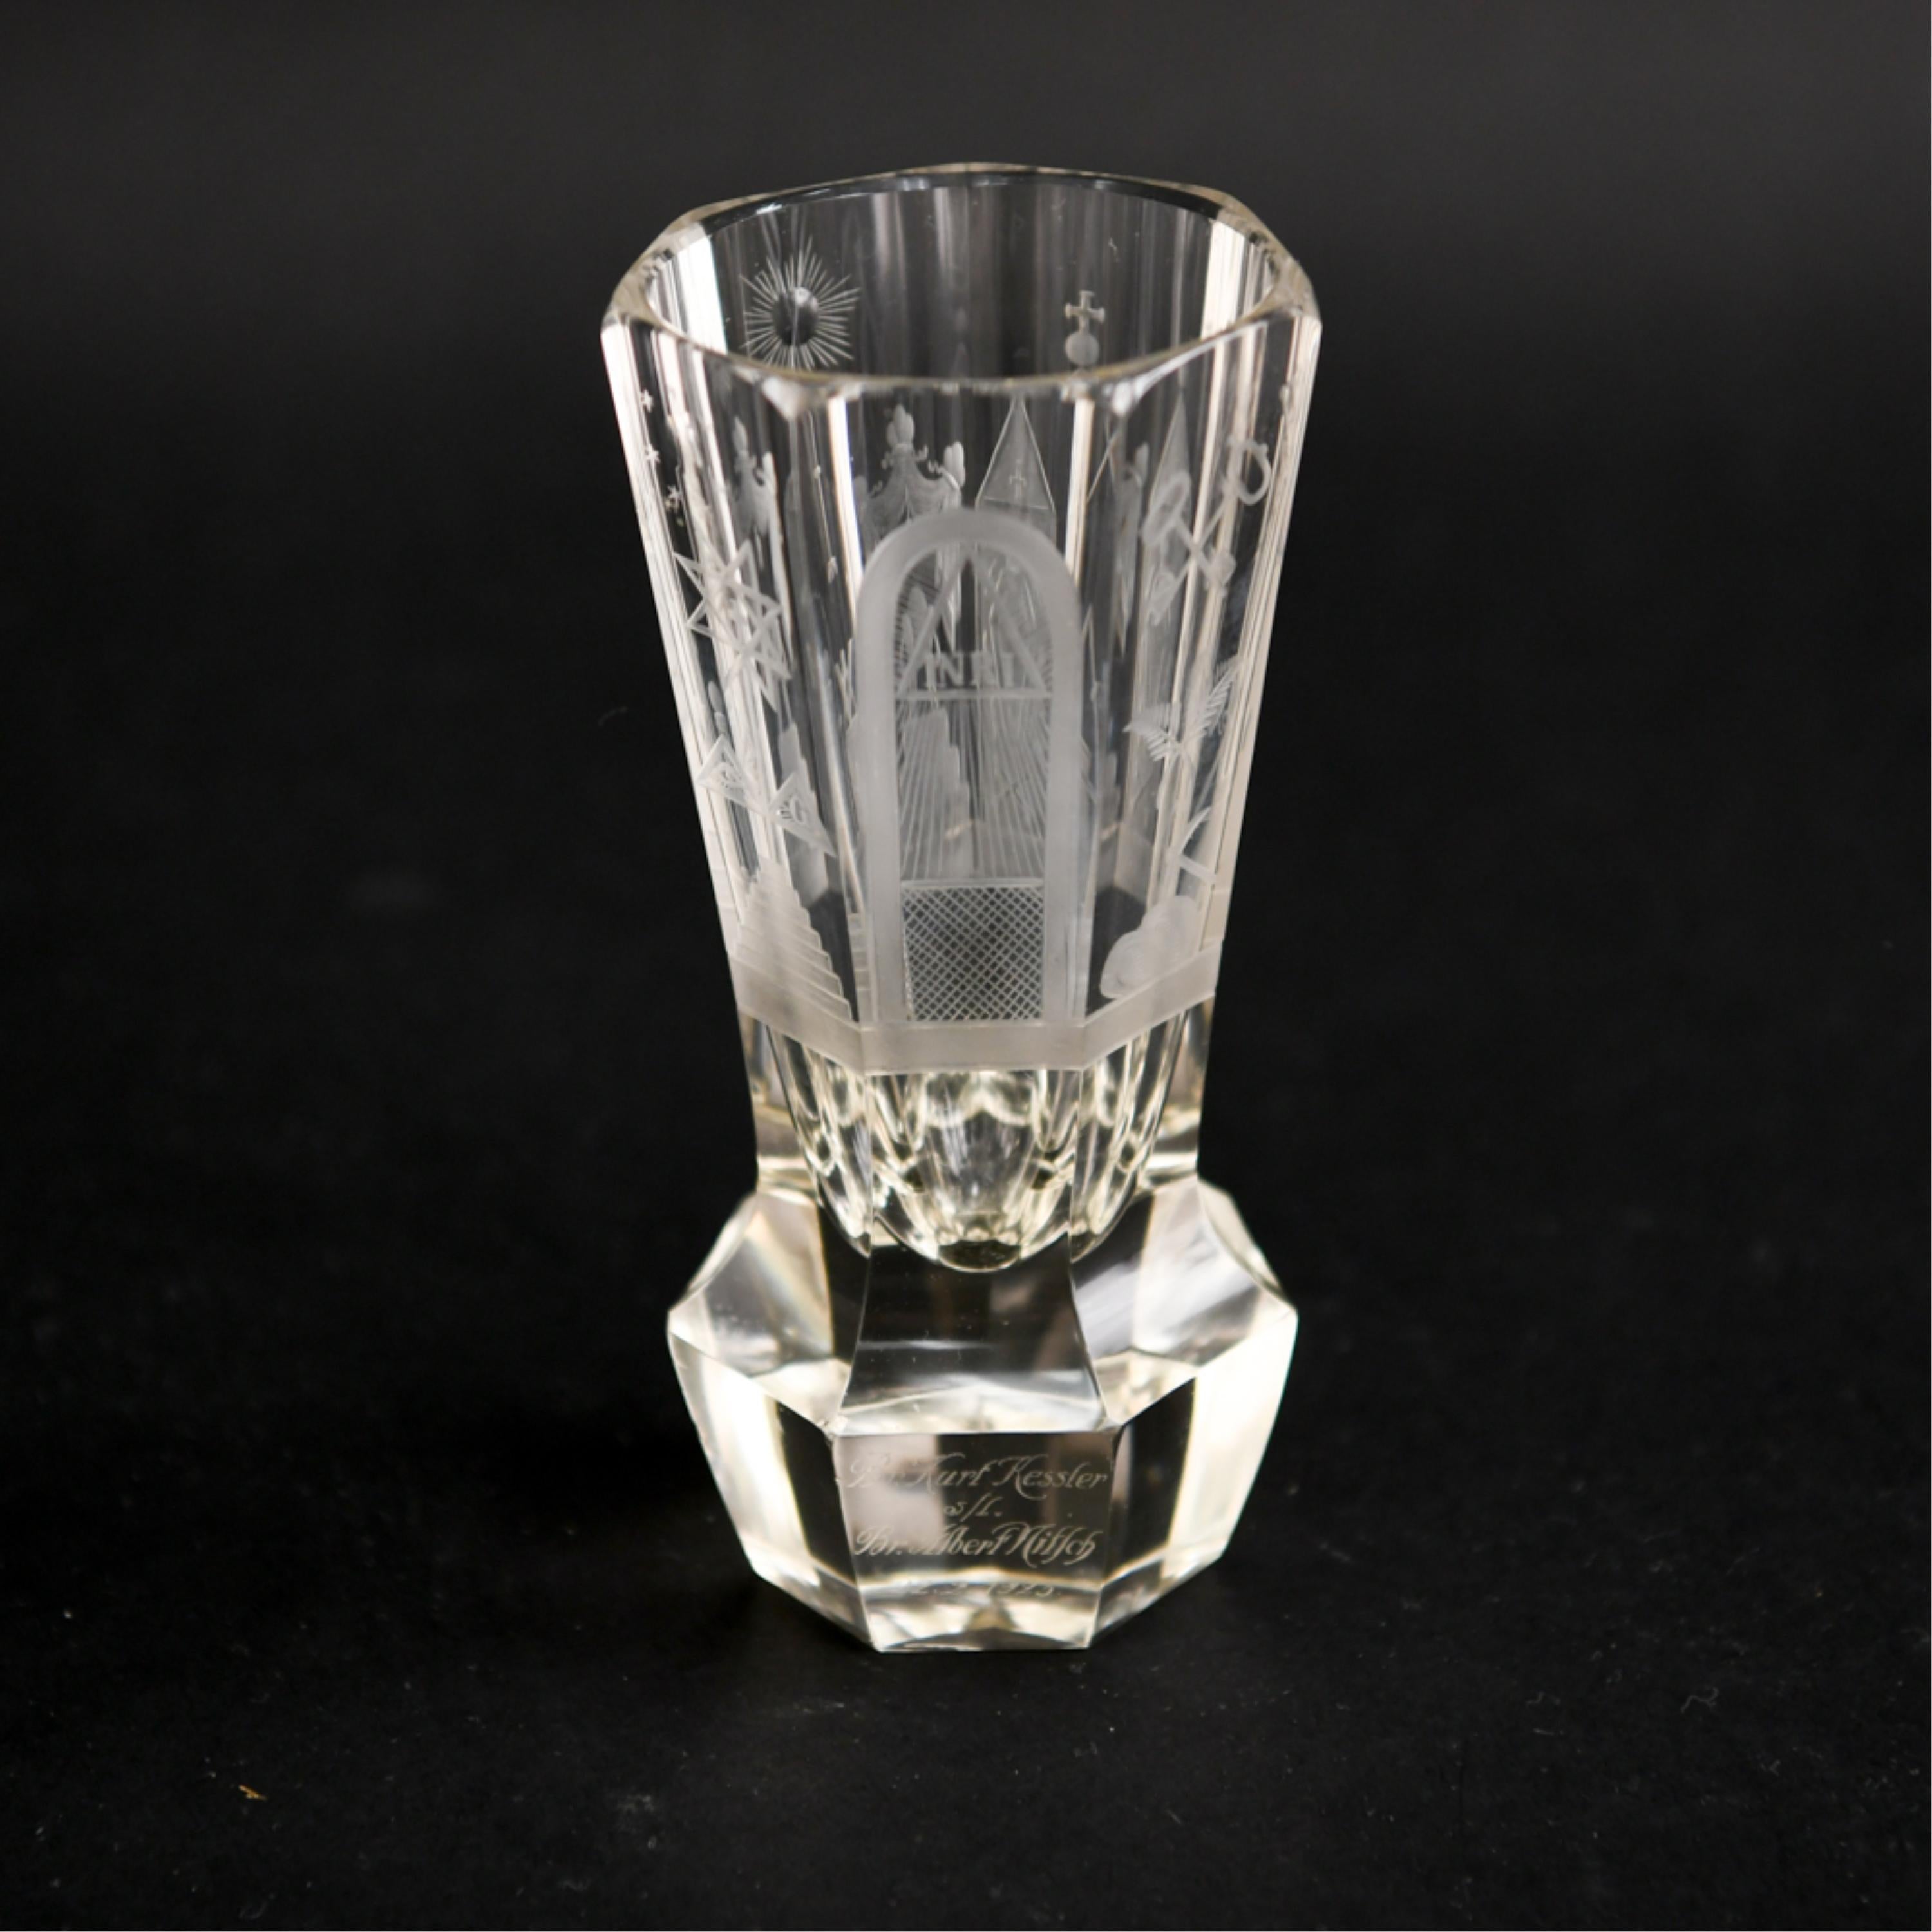 A very intricately carved and etched glass goblet with masonic symbols. Engraved dedication on base.